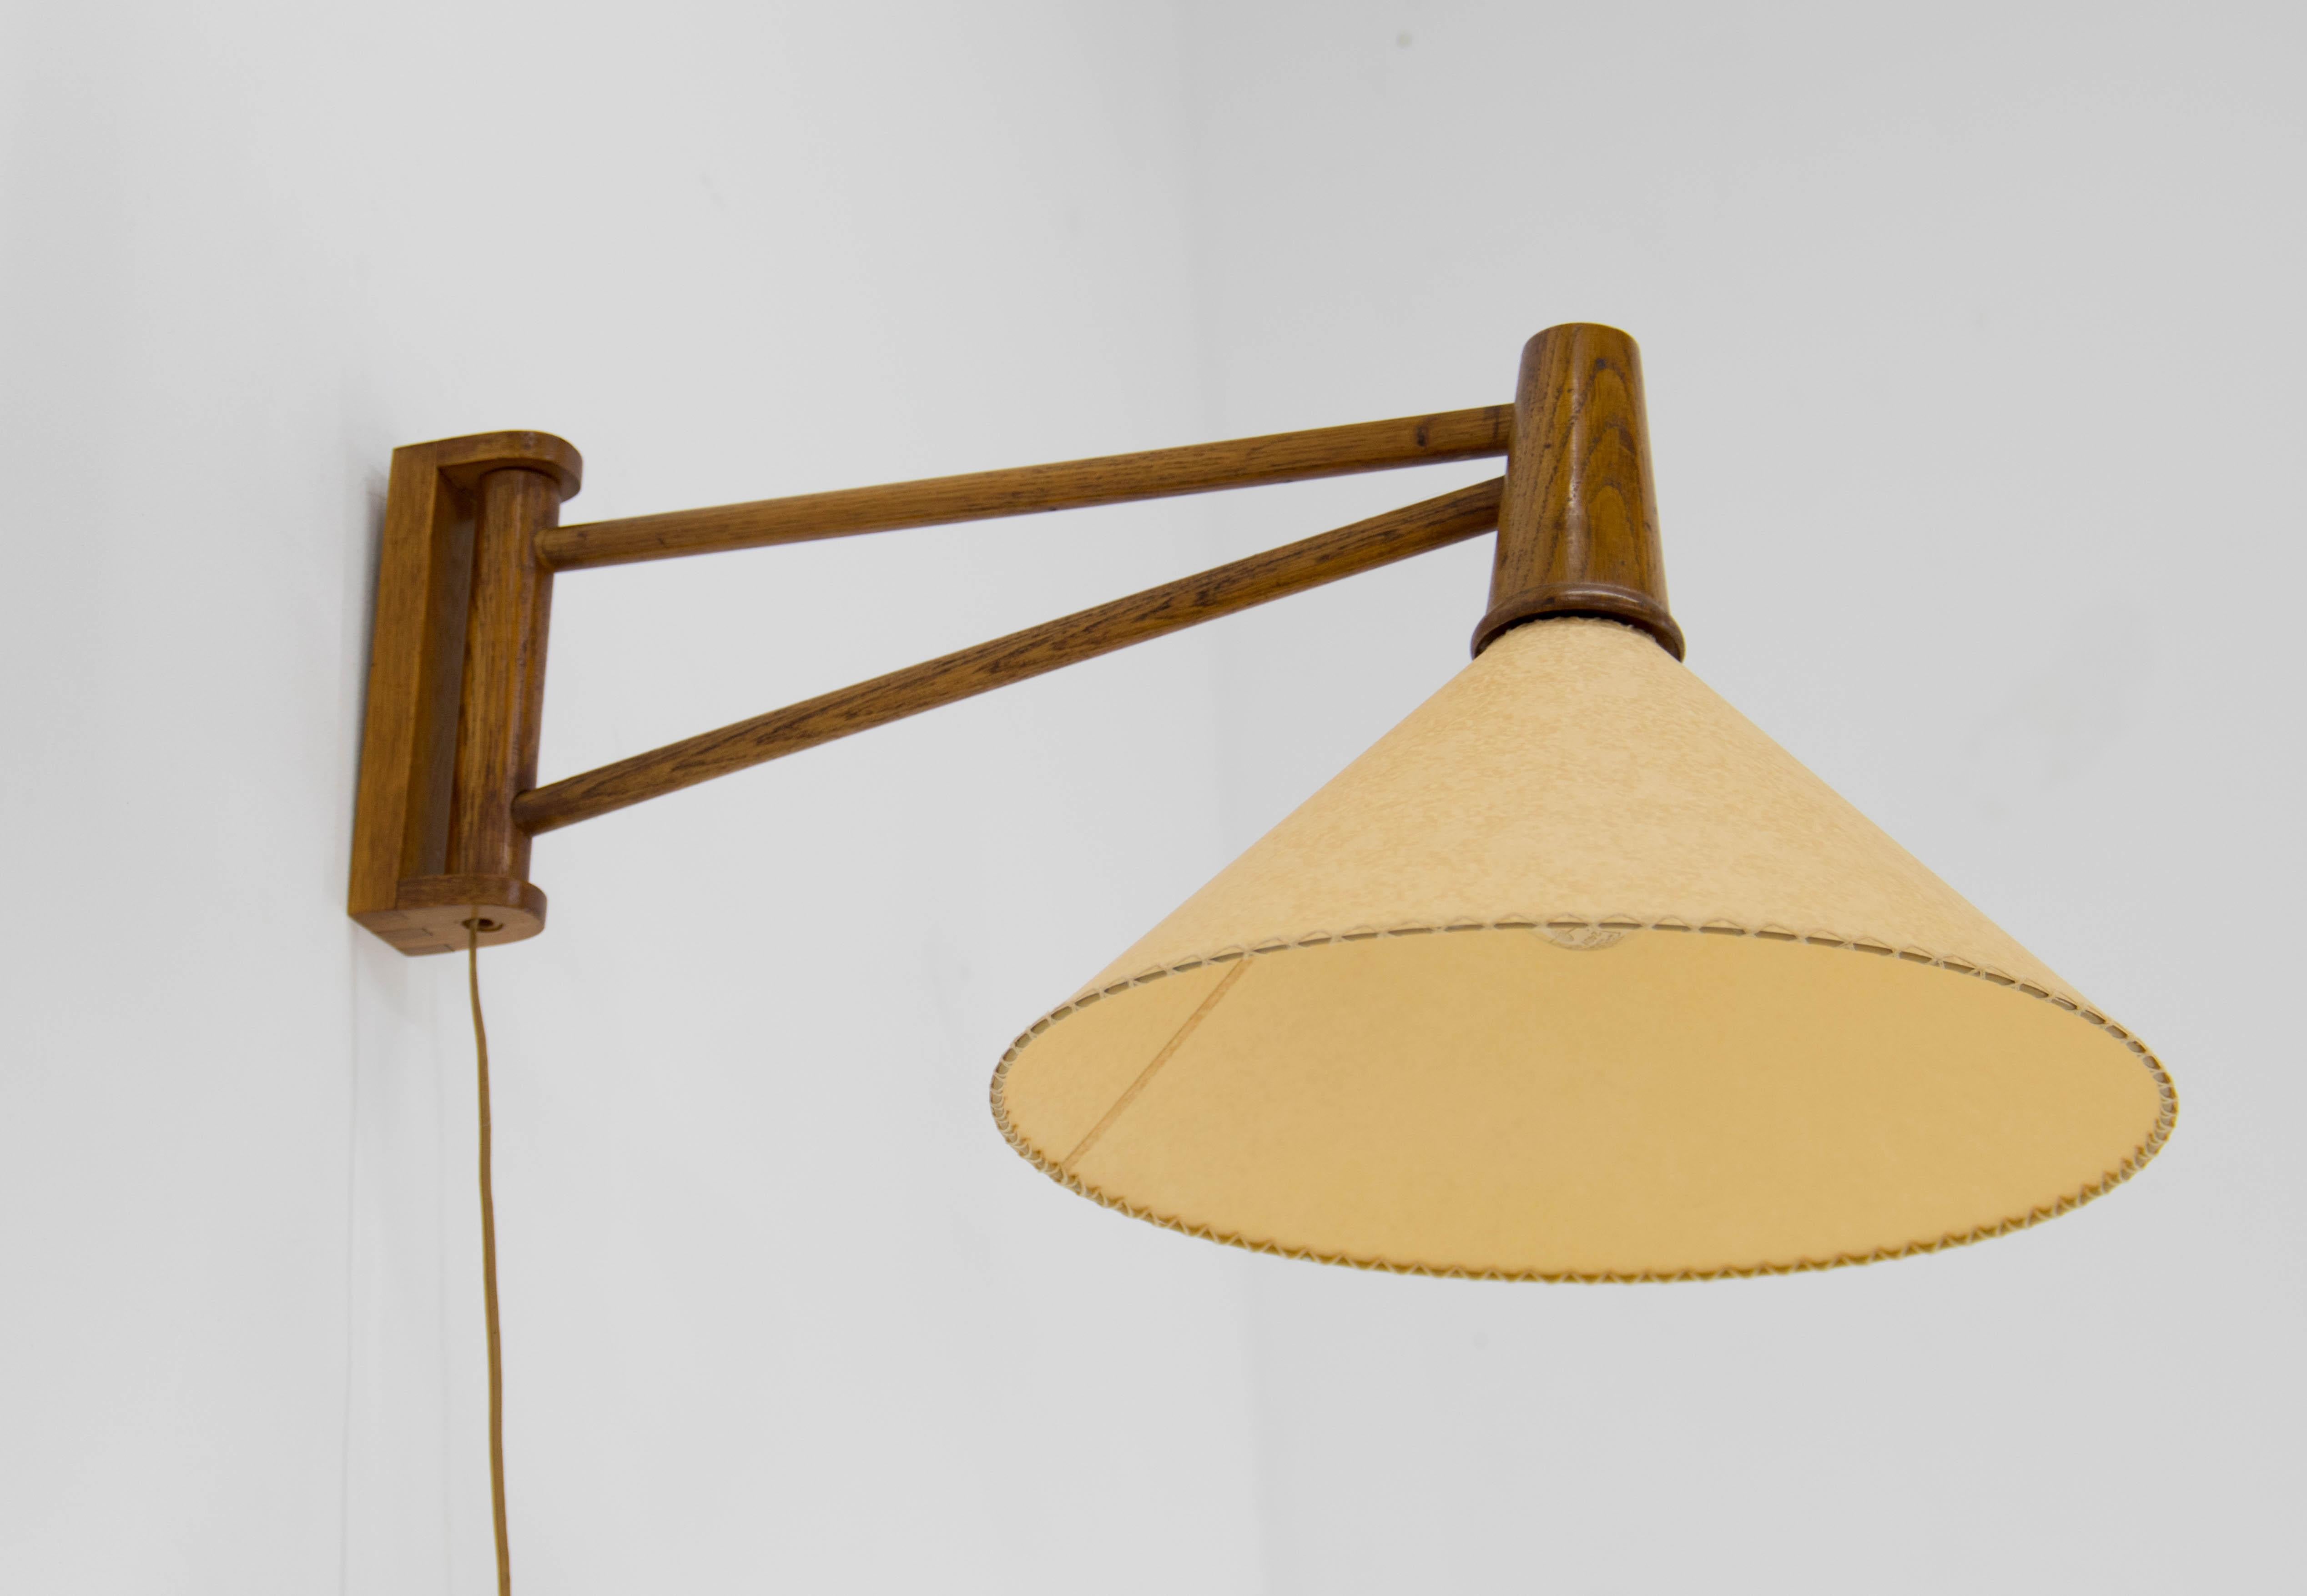 Iconic wall lamp by ULUV, Czechoslovakia, 1960s.
The wooden arm can rotate in the base on the wall.
Perfect condition, new parchment paper shade.
1x60W, E25-E27 bulb.
US plug adapter included
Shipping to US on request.